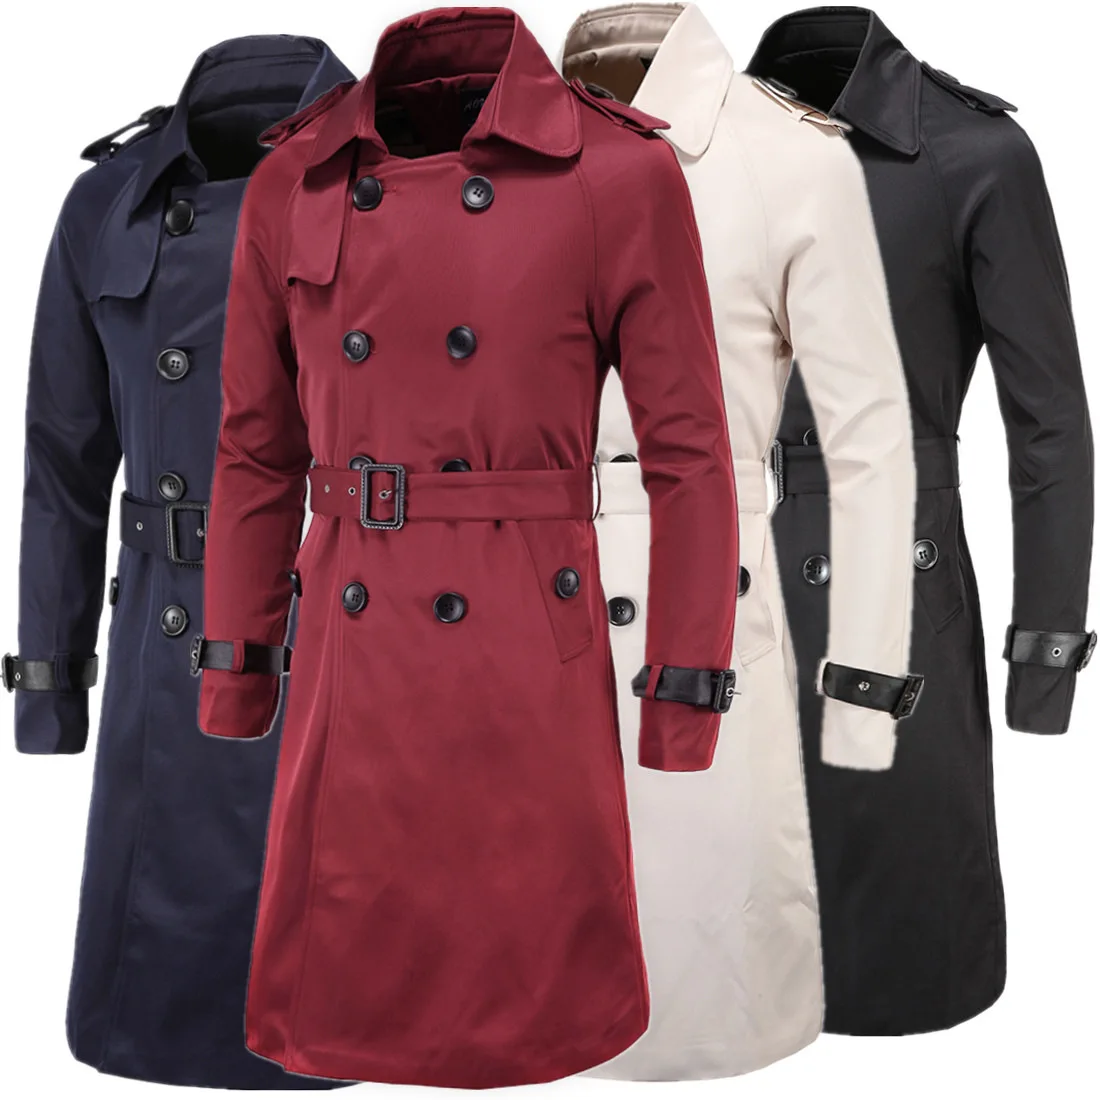 2022   Fashion Casual Men's Spring and Autumn Clothing Boutique European and American Long Slim Double Breasted Style Men's Coat